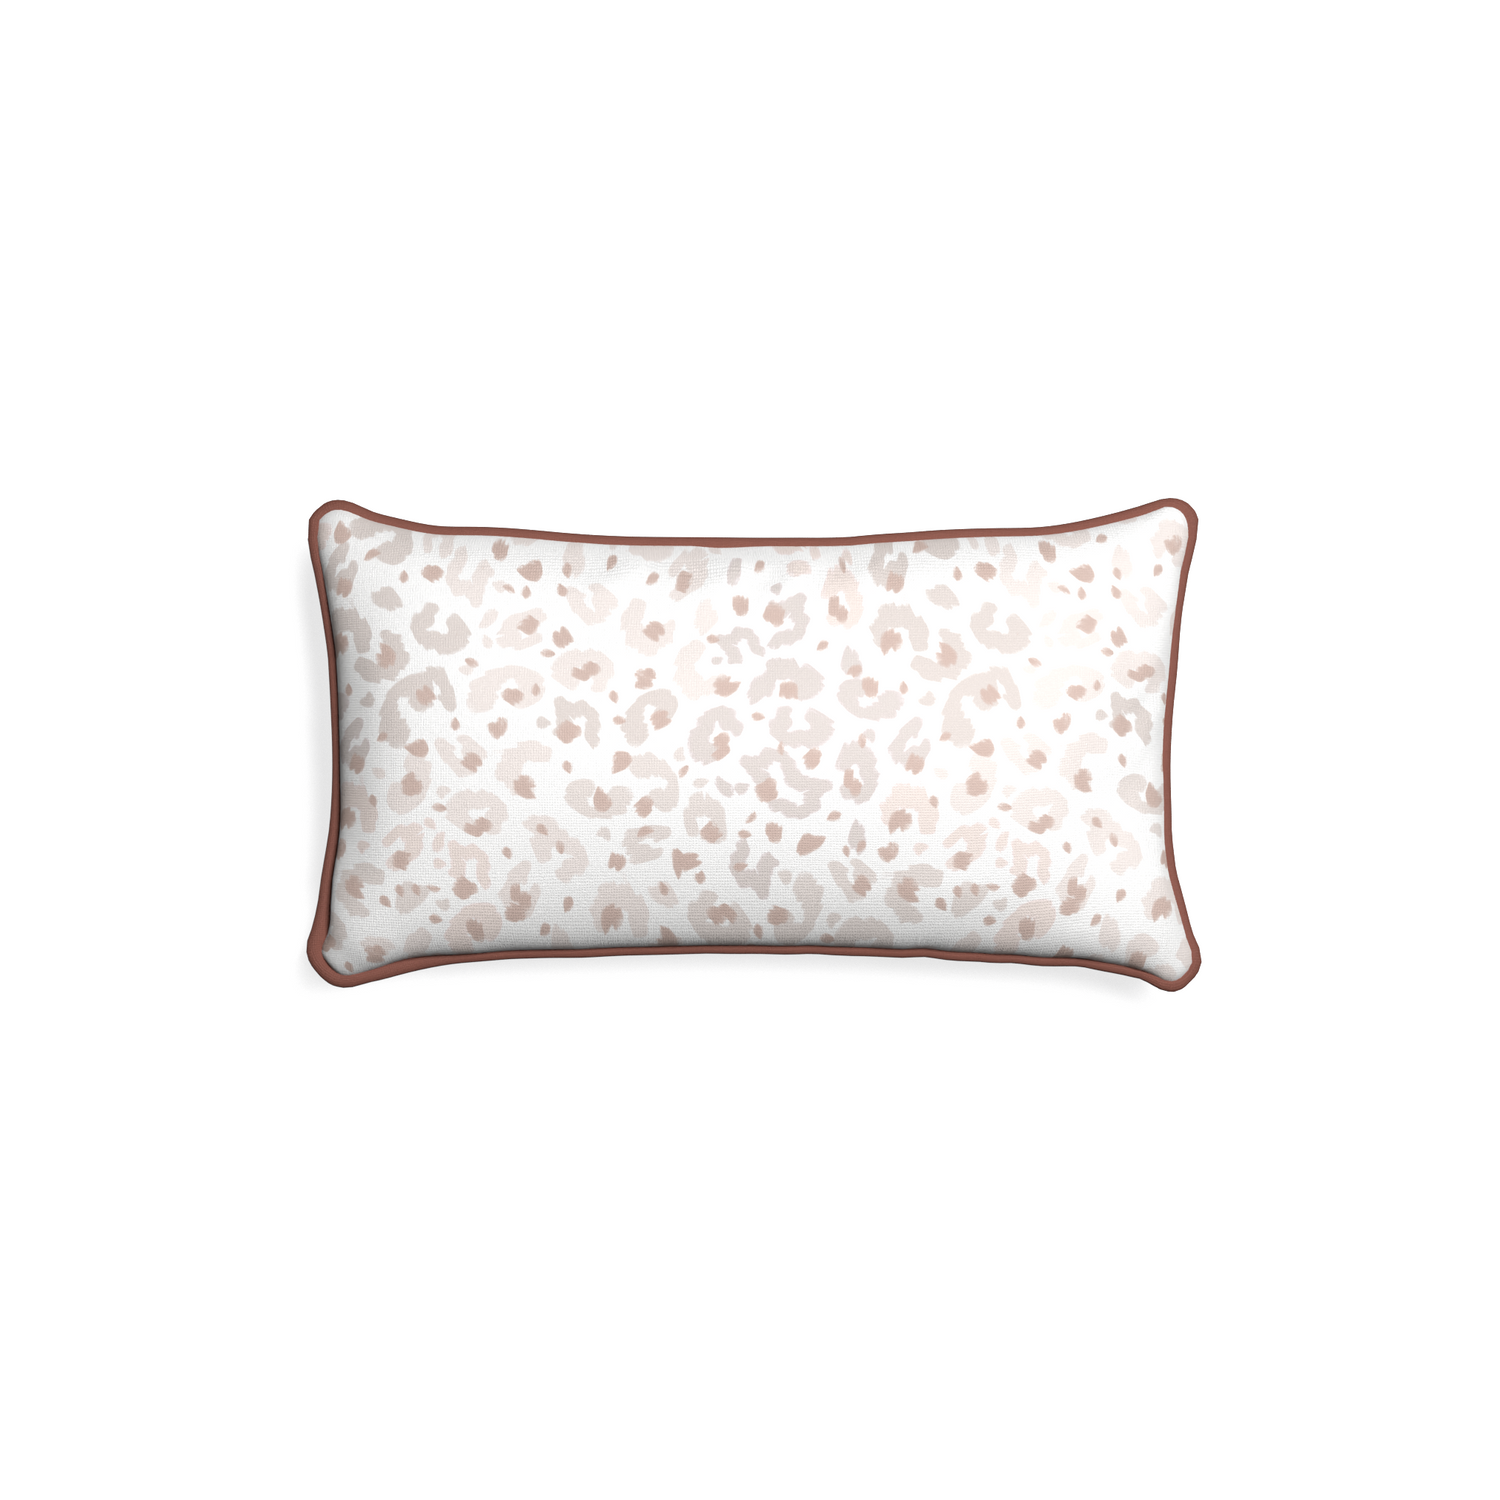 Petite-lumbar rosie custom beige animal printpillow with w piping on white background